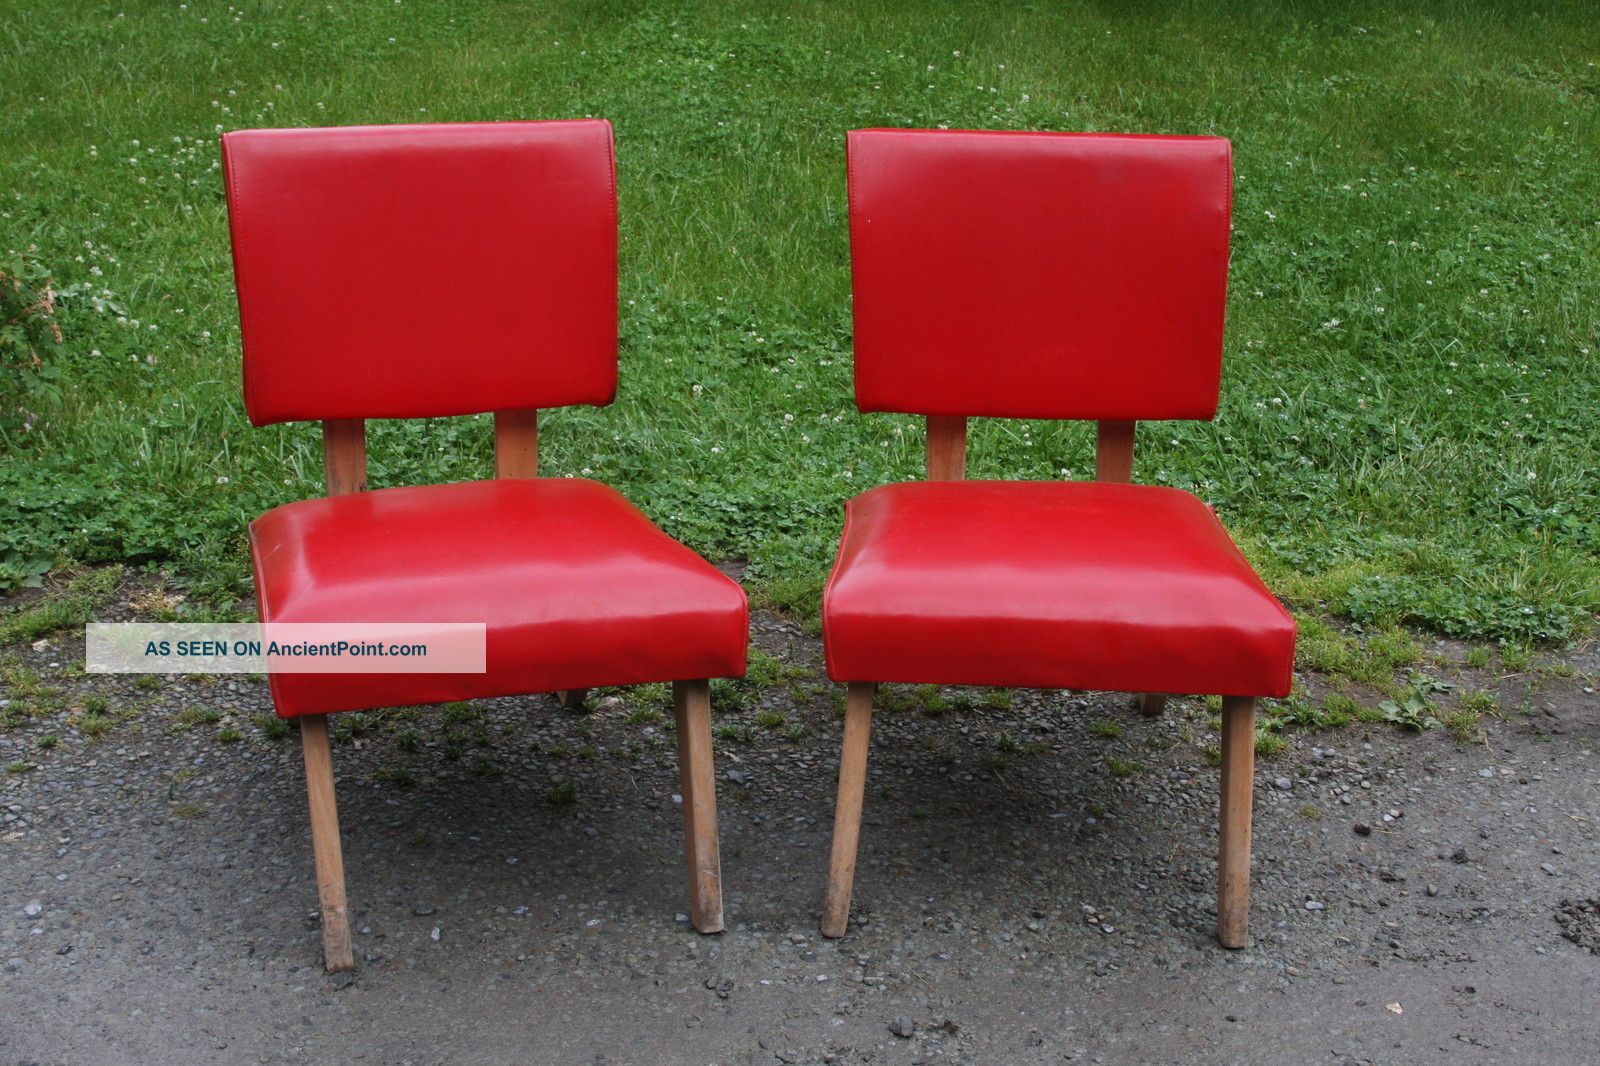 Vintage Retro Mid Century Modernism Pair Red 1940s - 50s Chairs - Style 1900-1950 photo